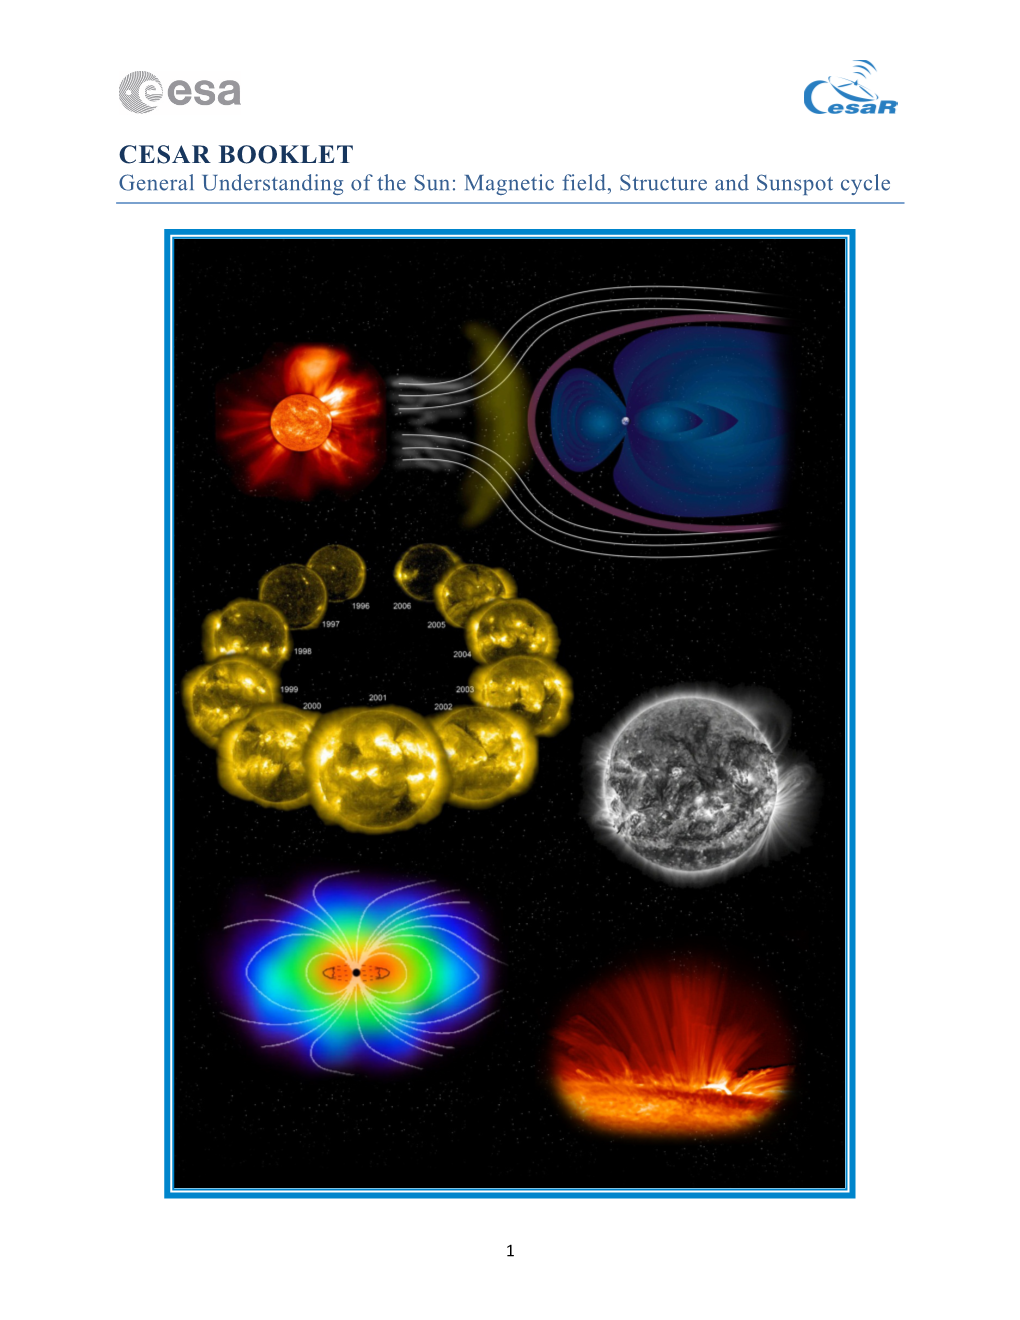 CESAR BOOKLET General Understanding of the Sun: Magnetic Field, Structure and Sunspot Cycle